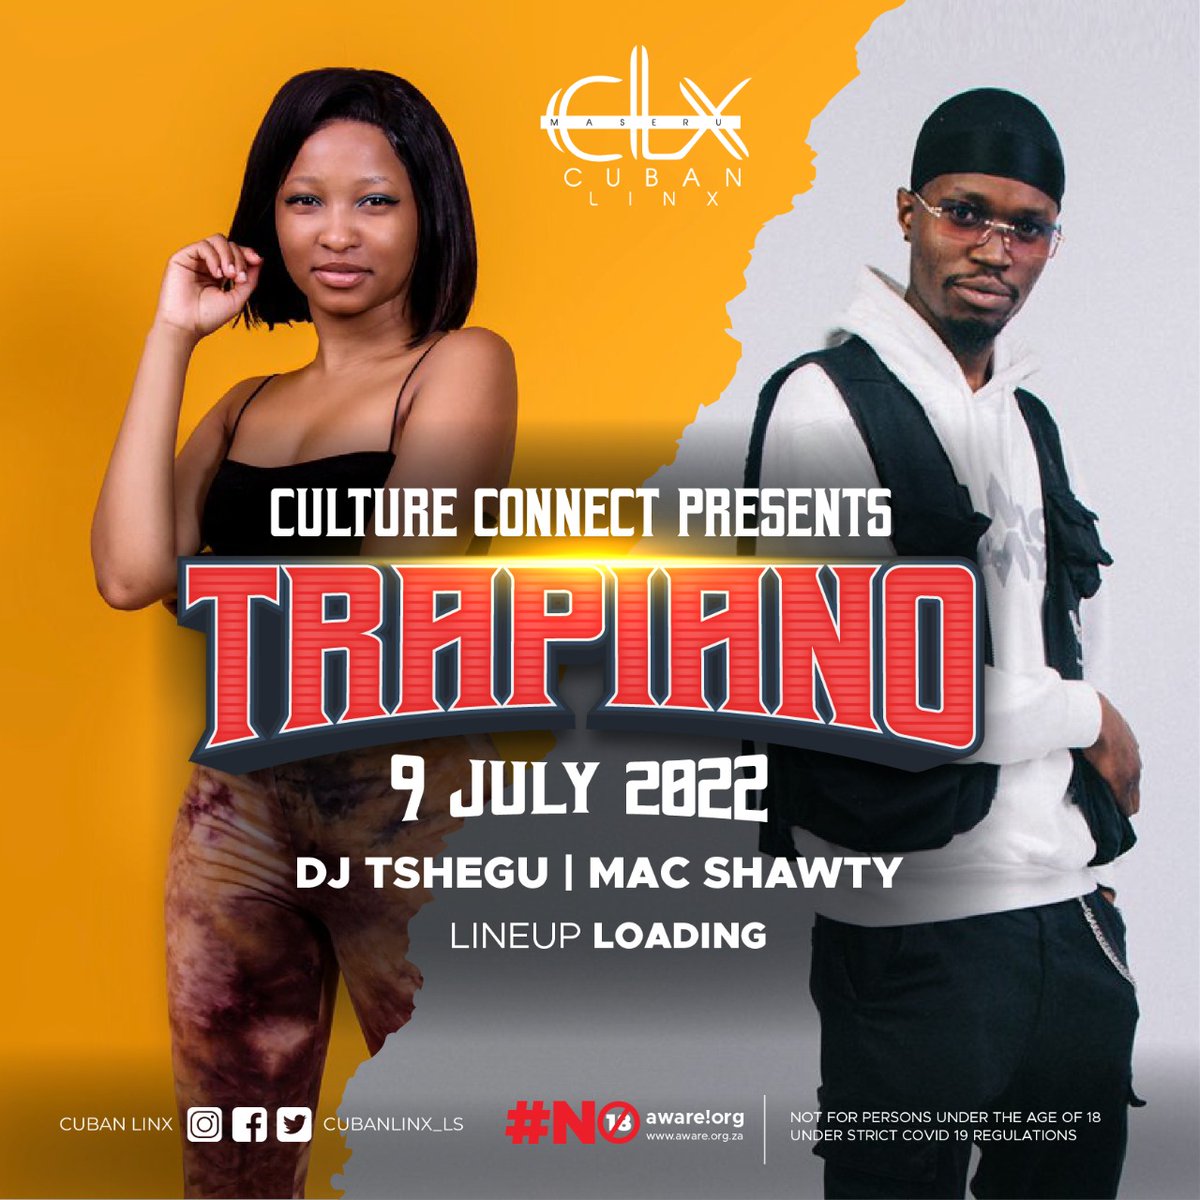 Sat 9th July #TRAPIANO... We got @djtshegu @mac_shawtydj in the building... Dope local line up coming.. #justlive